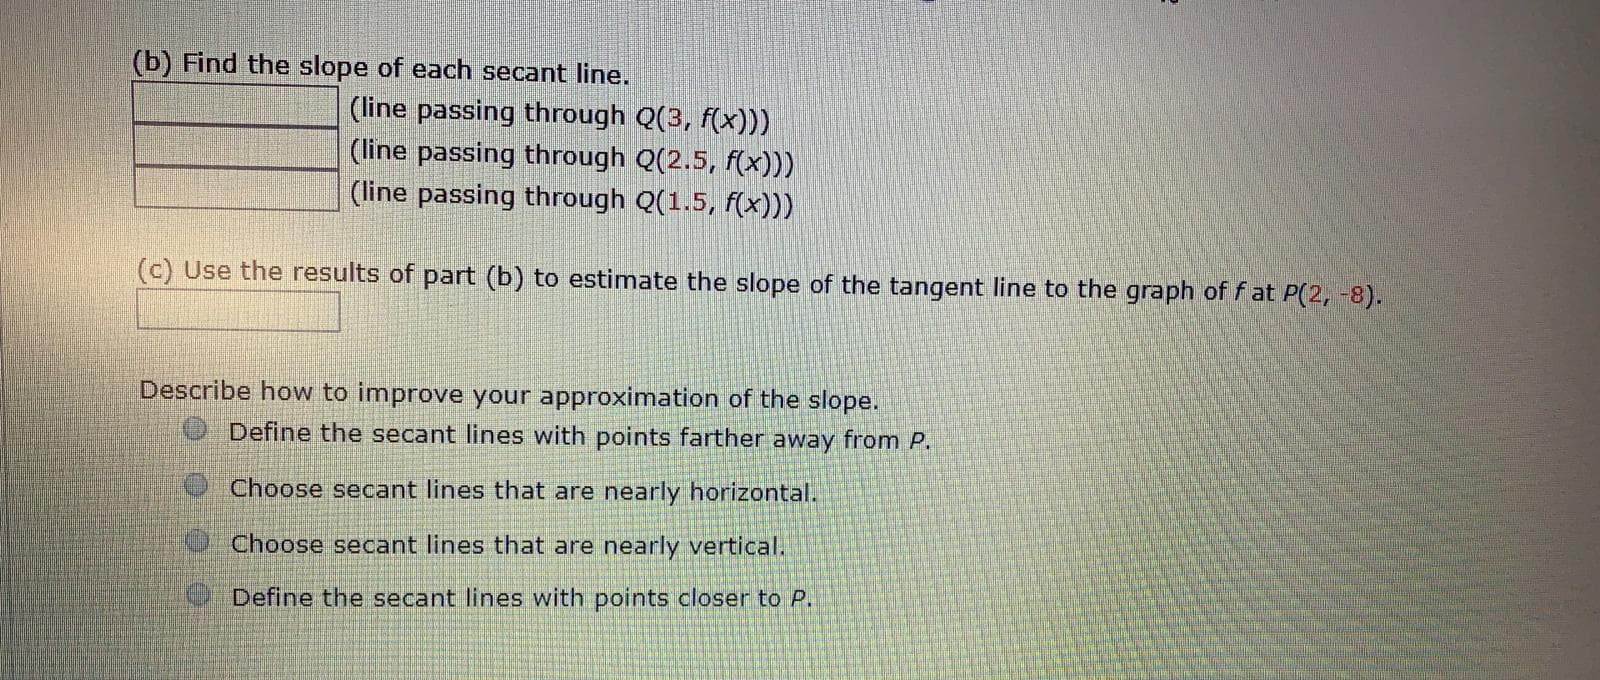 (b) Find the slope of each secant line.
(line passing through Q(3, f(x)))
(line passing through Q(2.5, f(x)))
(line passing through Q(1.5, f(x)))
